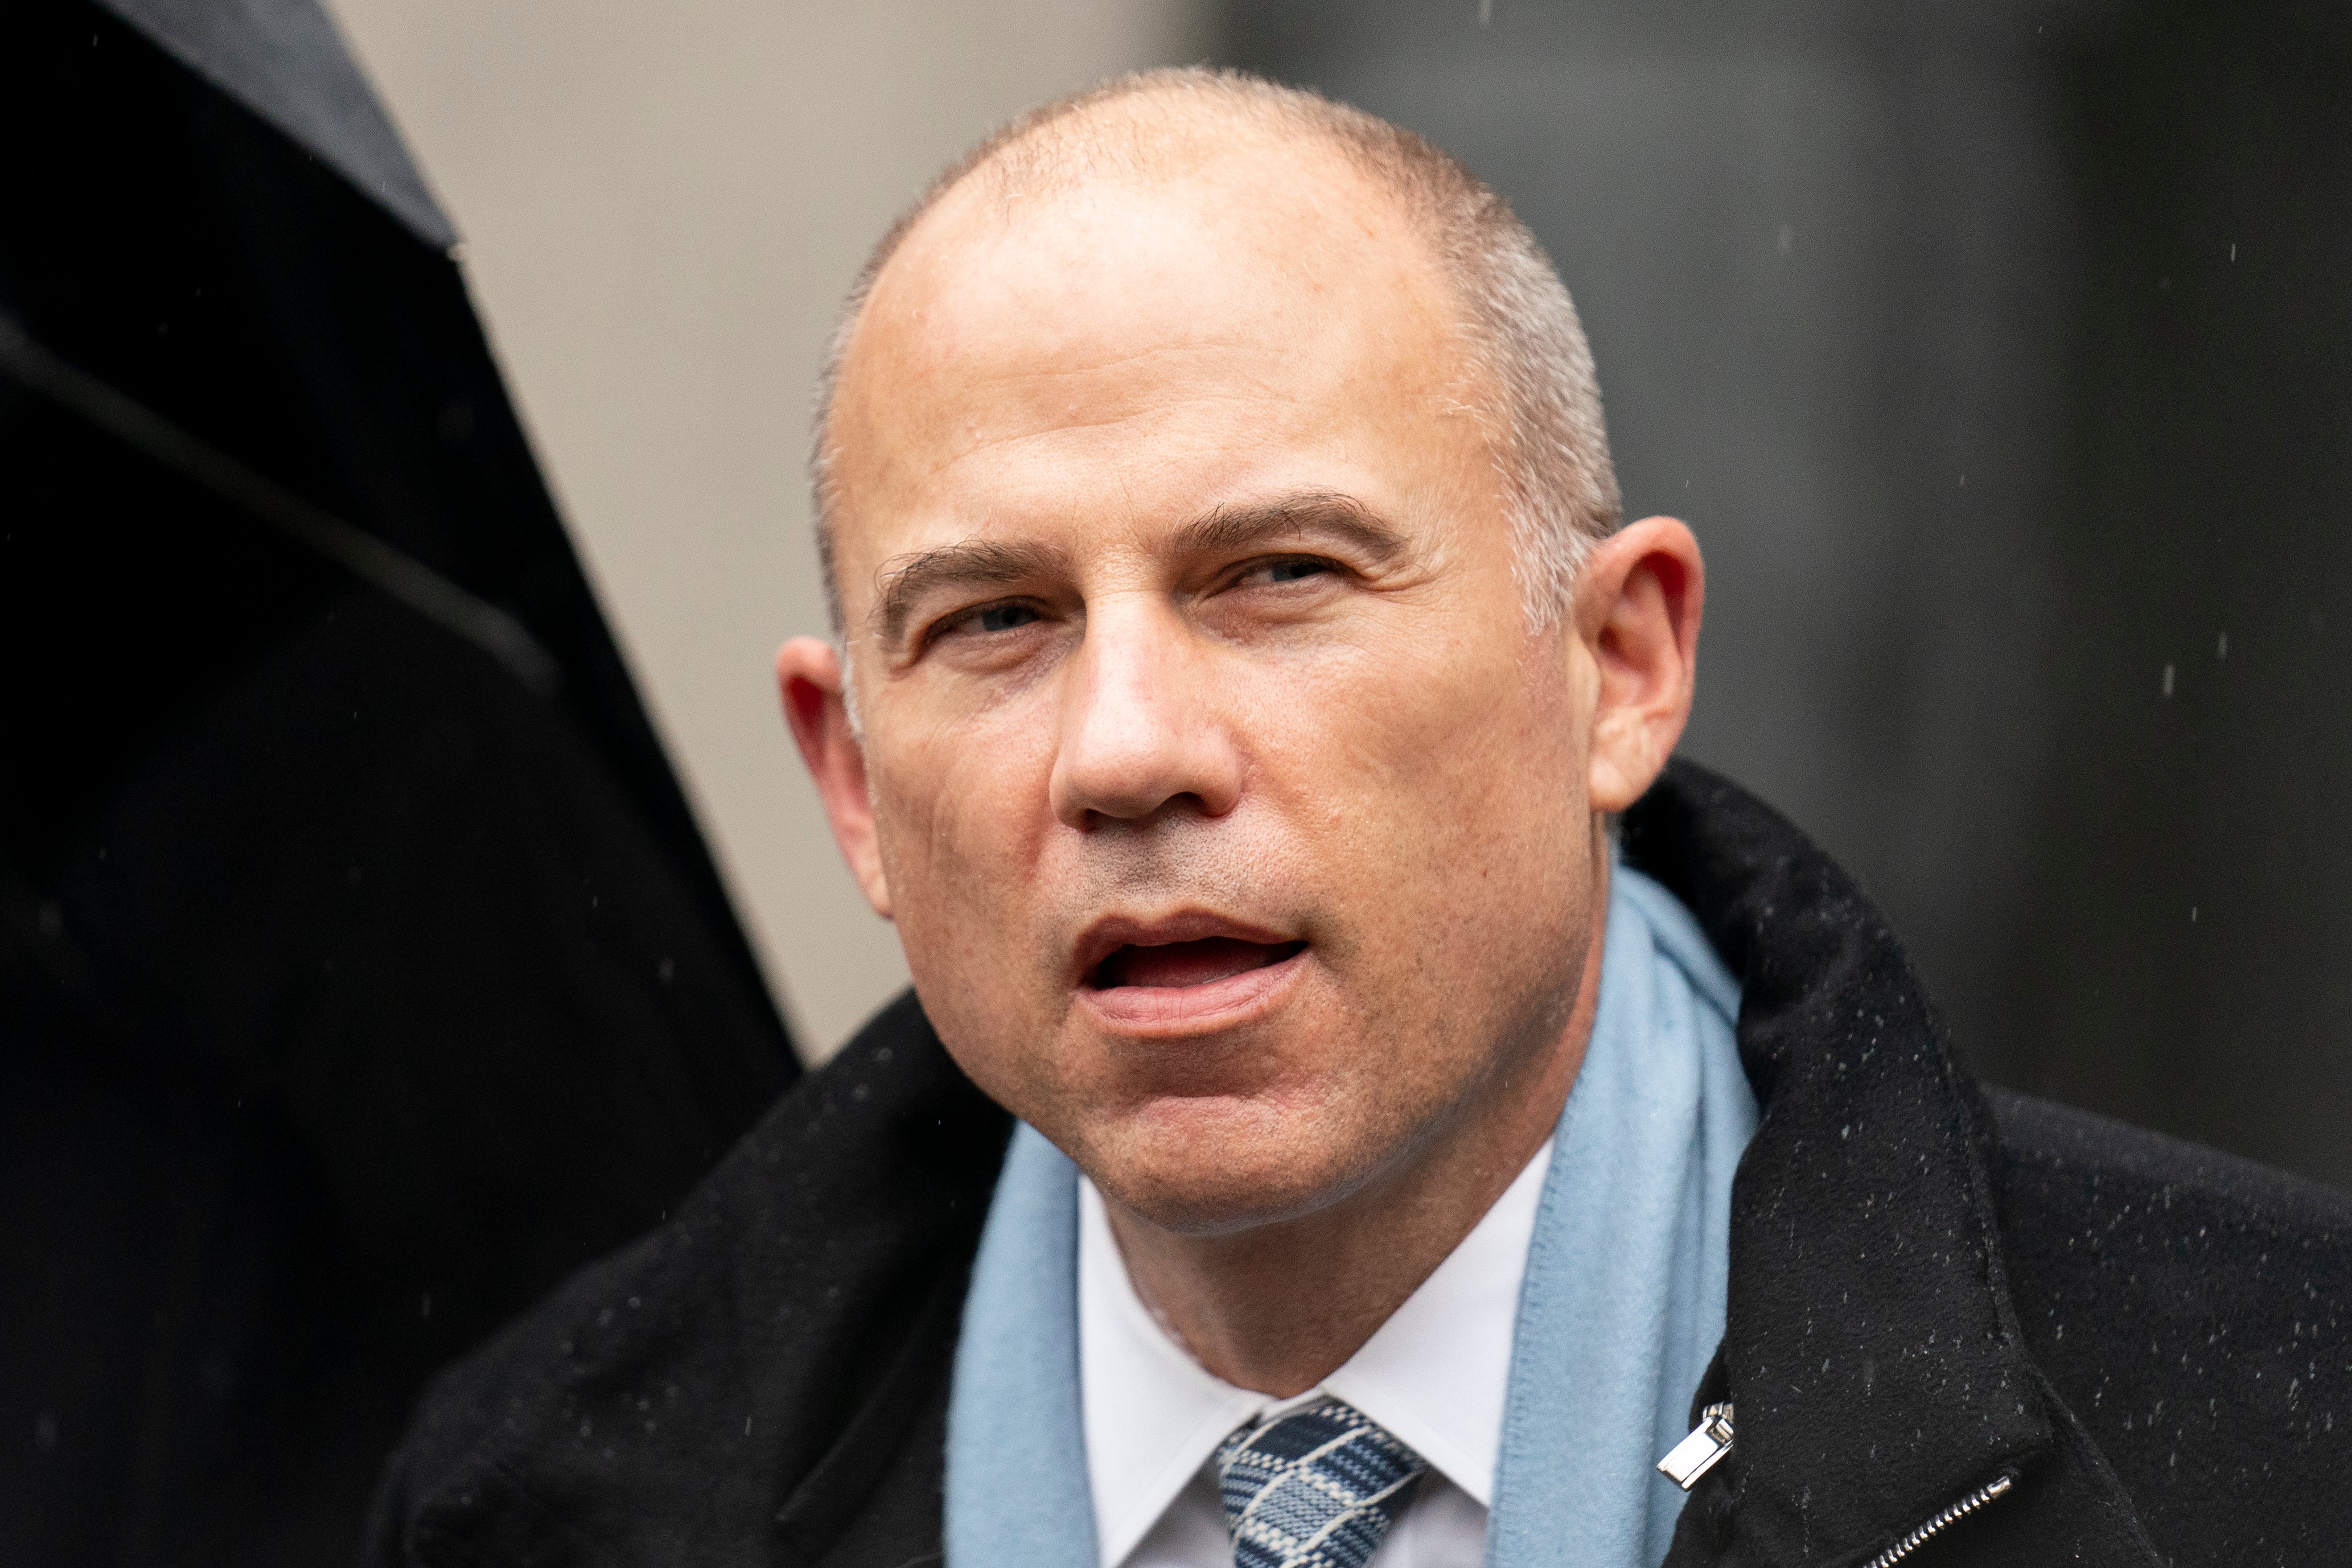 Michael Avenatti speaks to members of the media after leaving federal court on 4 February 2022, in New York